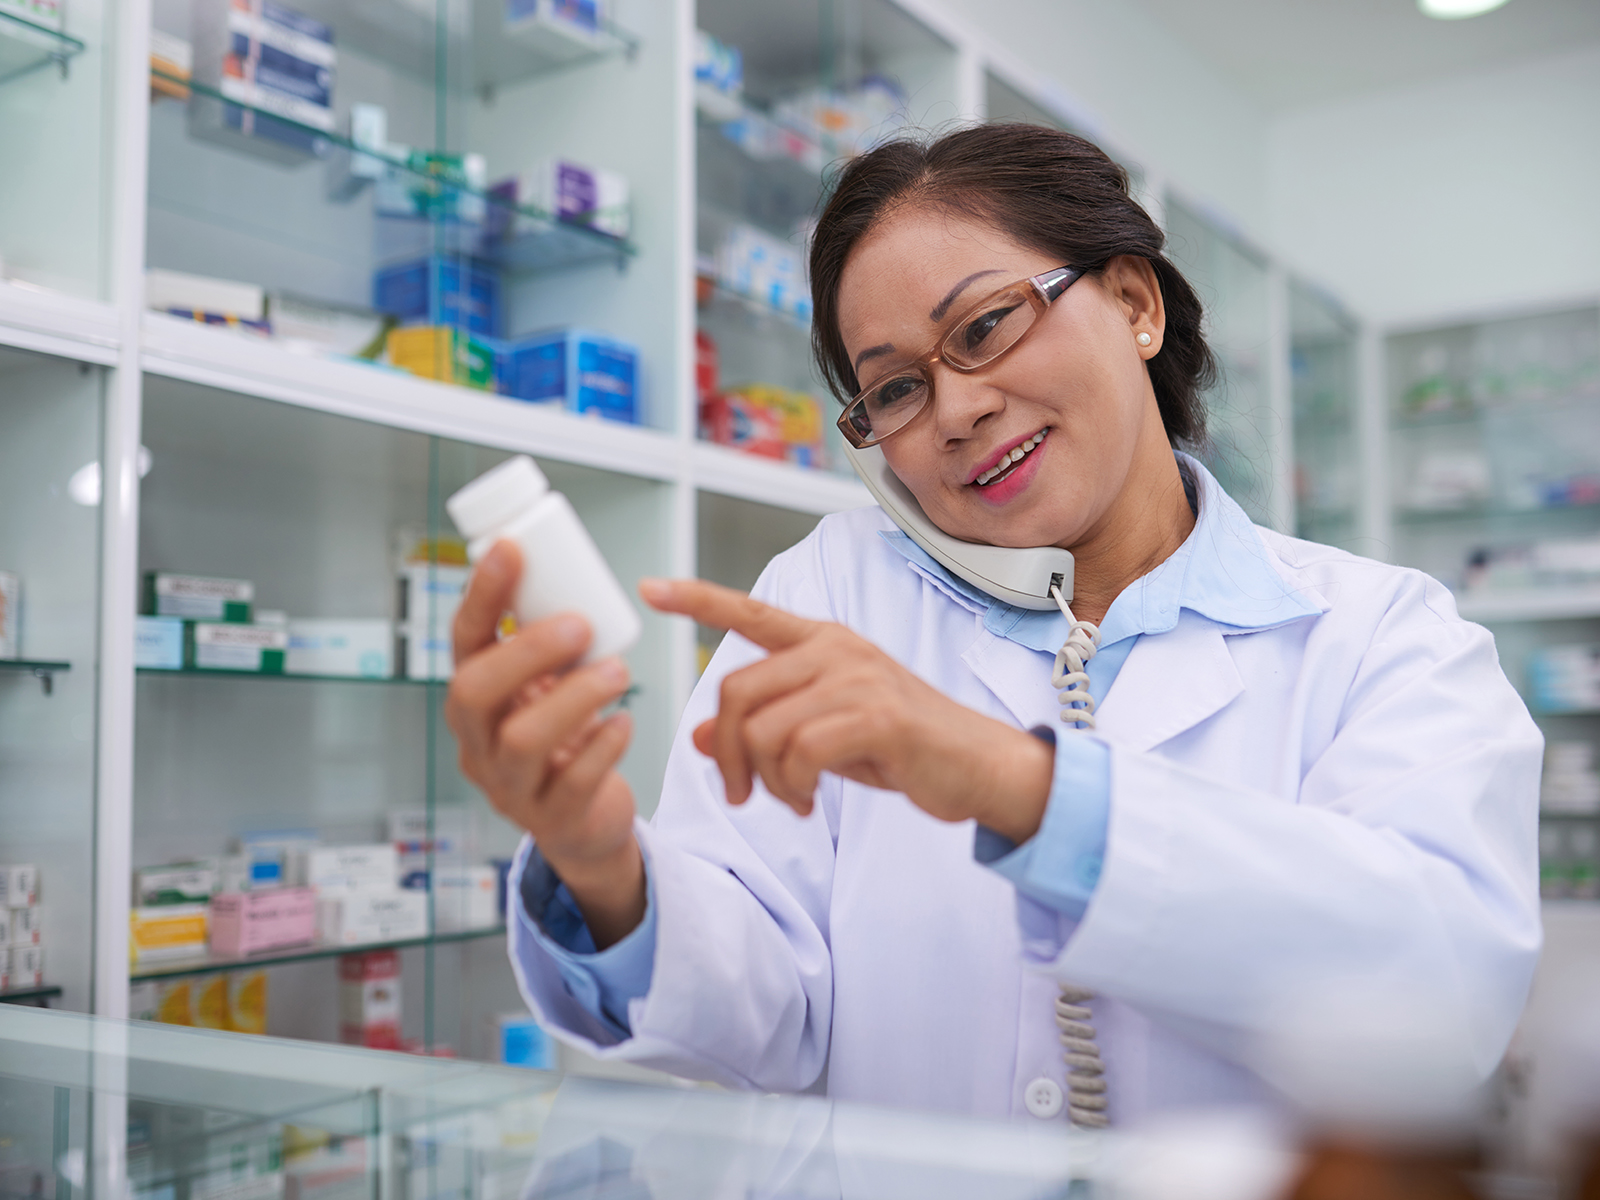 Pharmacist reading medication label while on the phone.